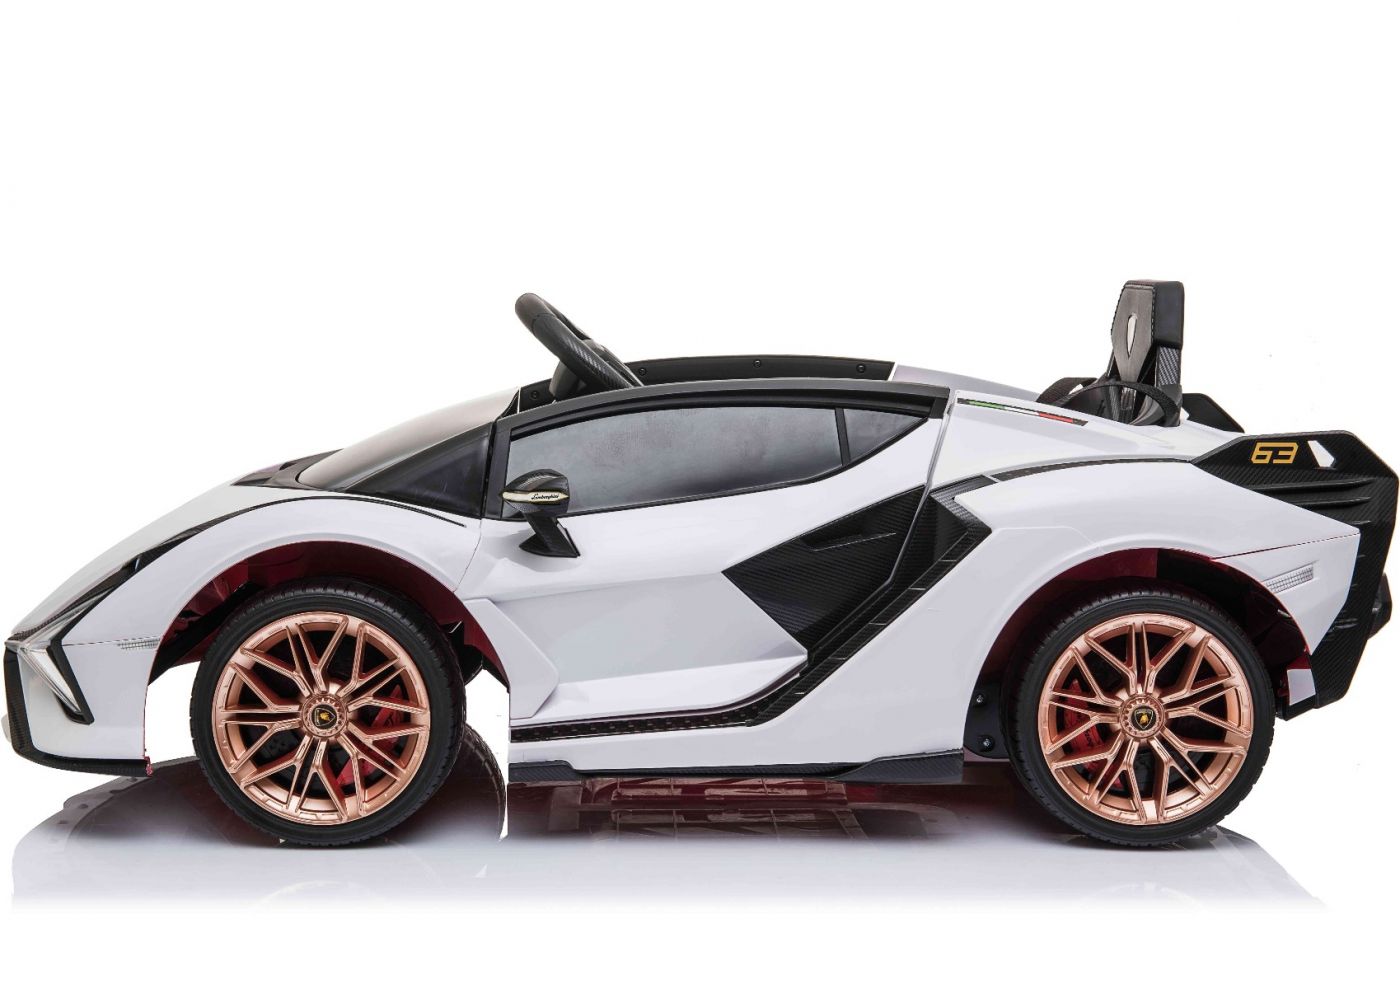 Unique white and gold Lamborghini Sián electric ride-on toy for kids.